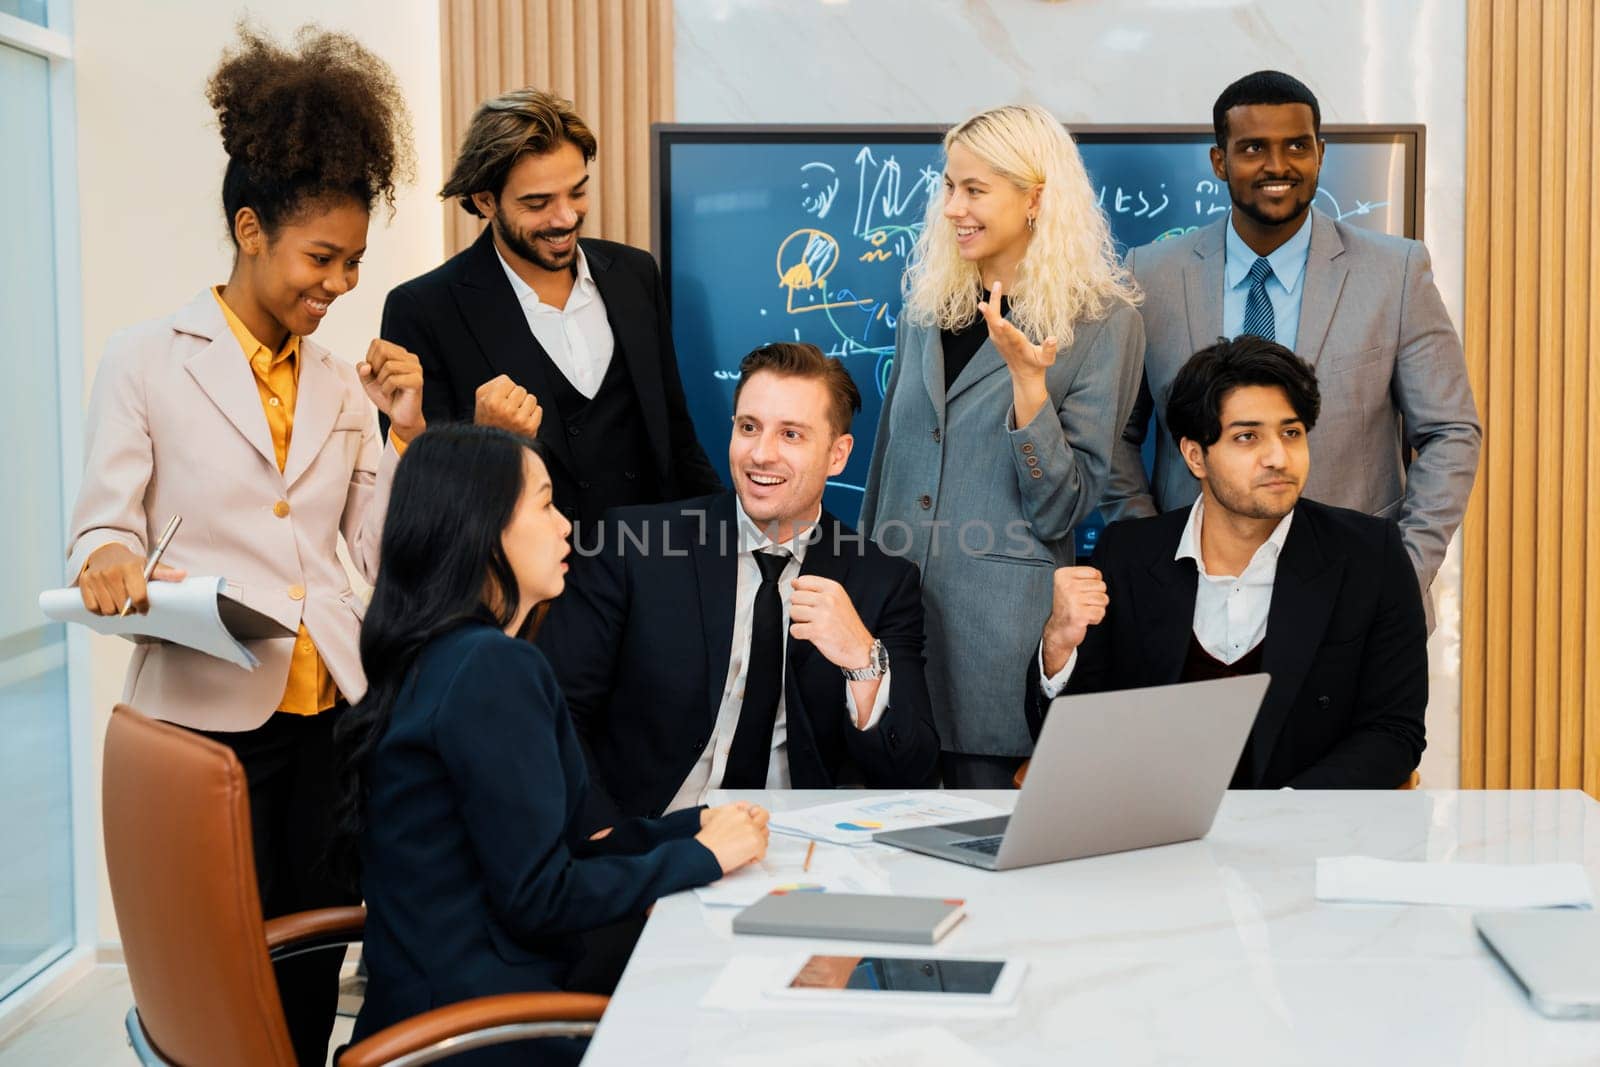 Multicultural businesspeople brainstorming business idea together. Diverse professional business team working together, sharing, planing idea, strategy. Meeting room, laptop, presentation. Ornamented.